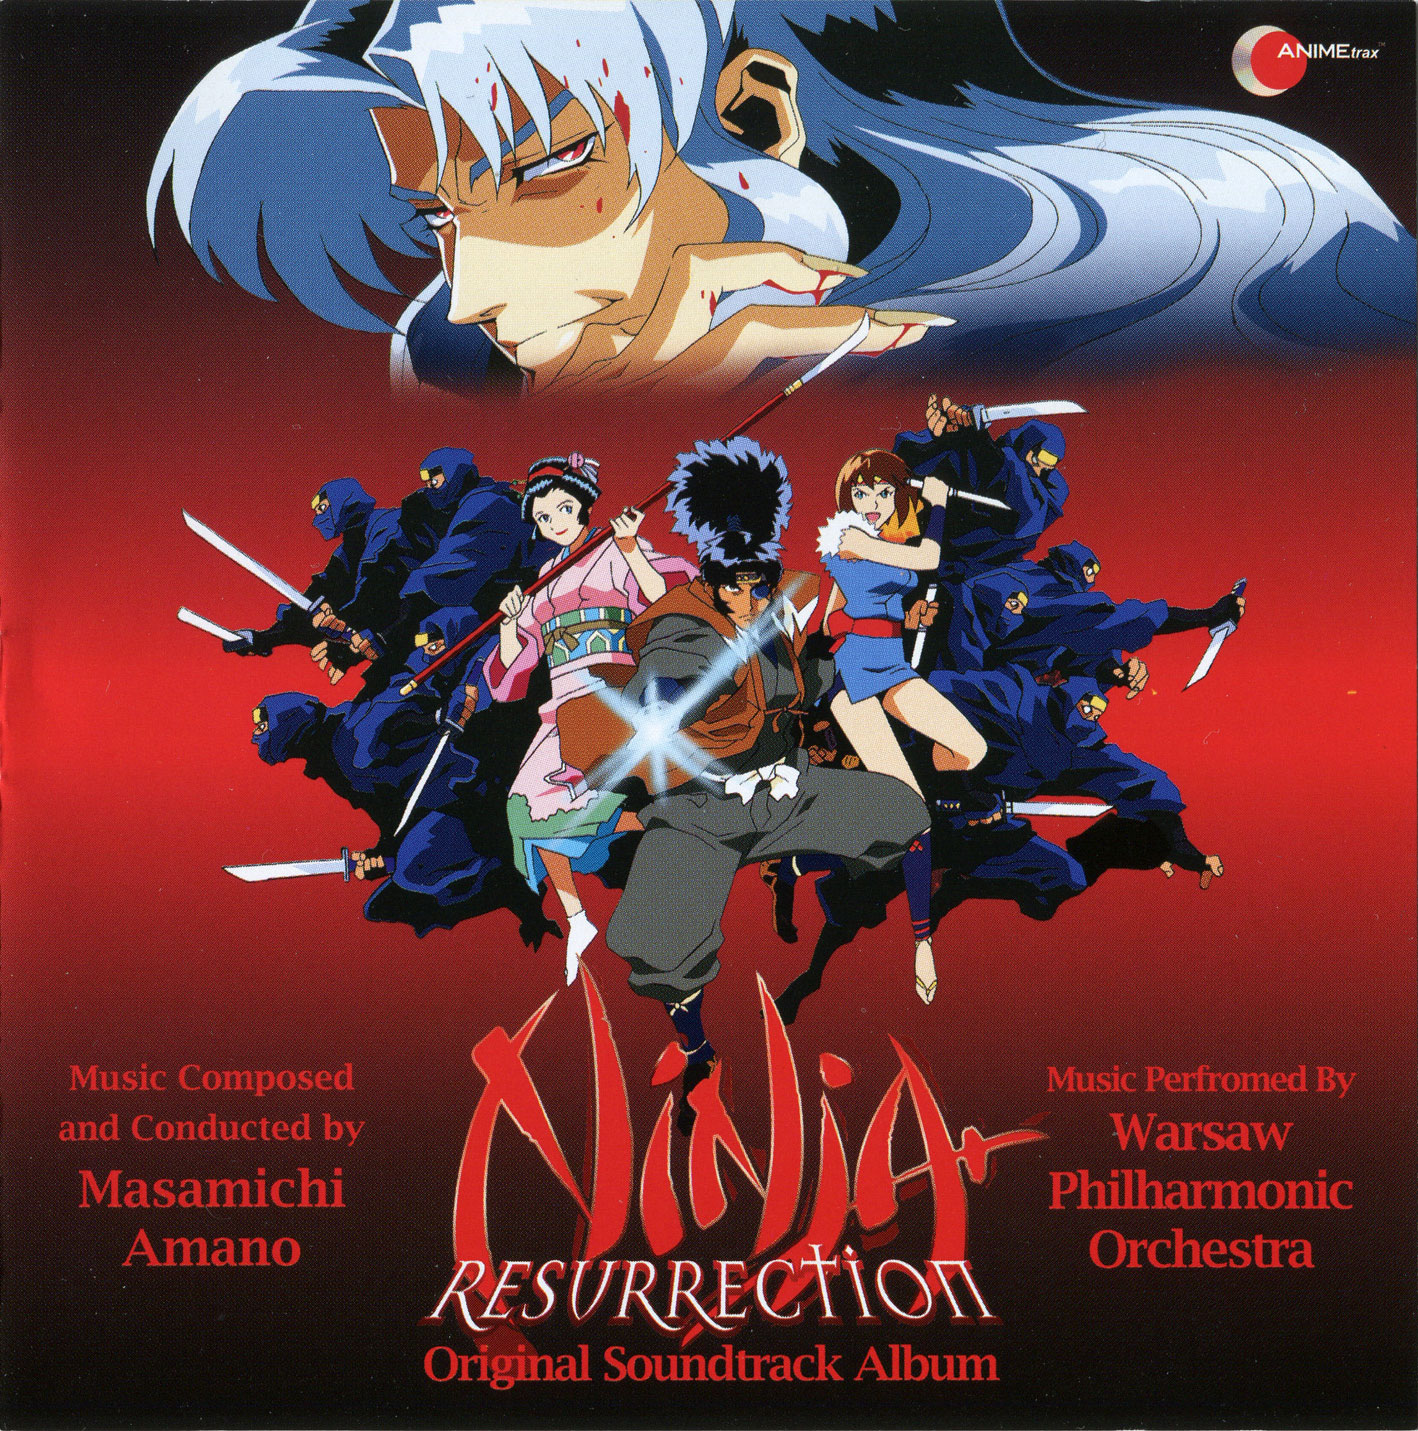 Ninja Resurrection Episode 1 Of 2 Watch Or Download This Series Dubbed